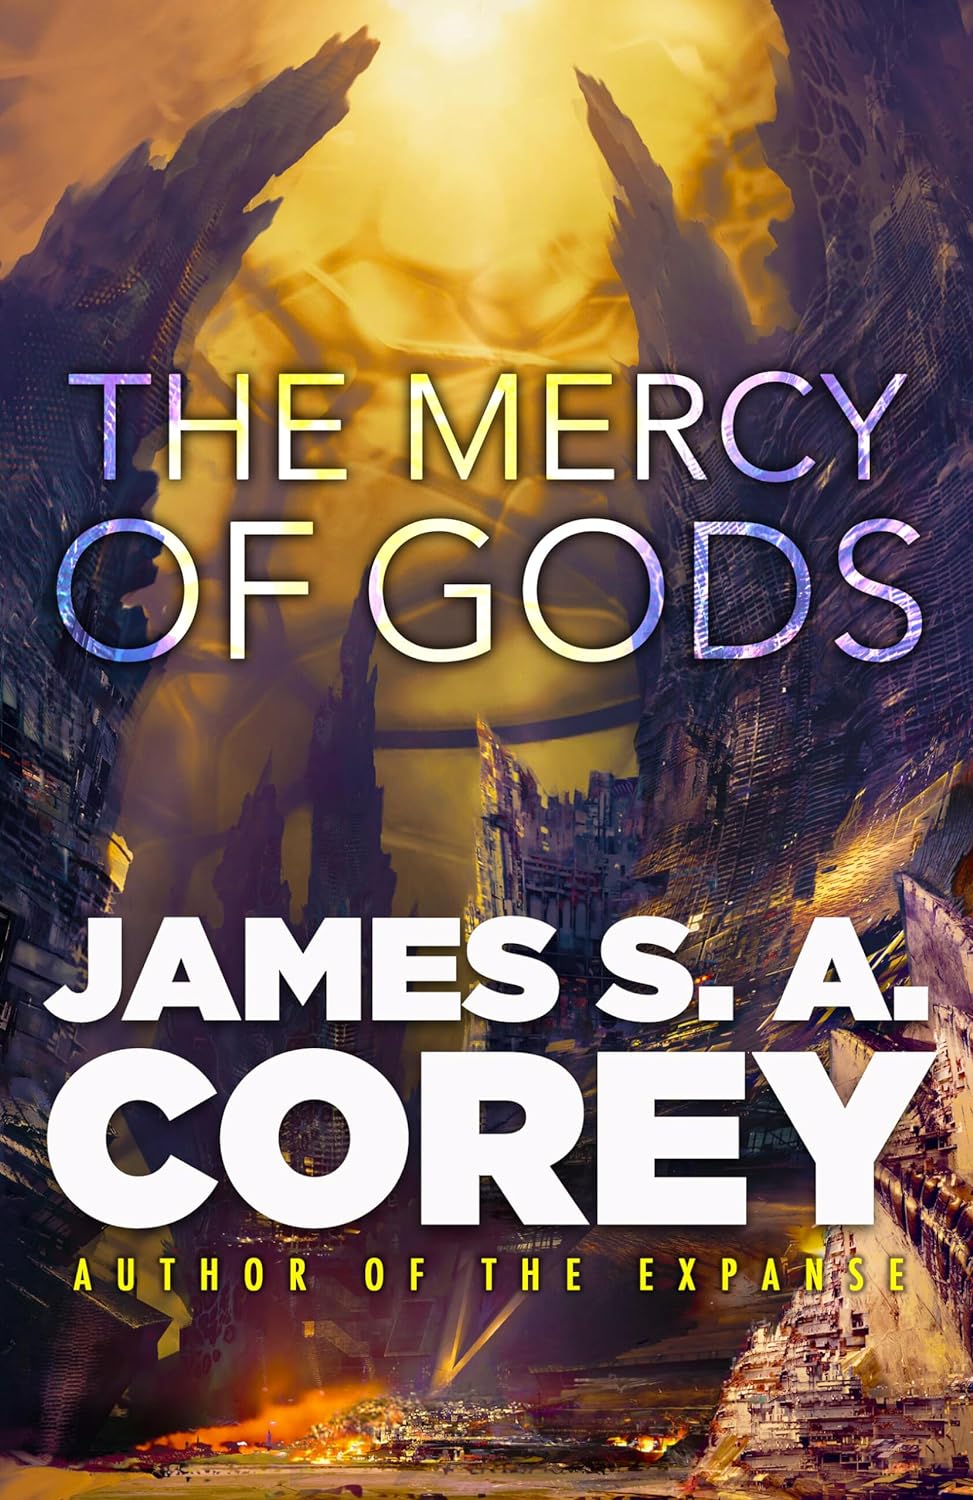 The Mercy of Gods by James S. A. Corey